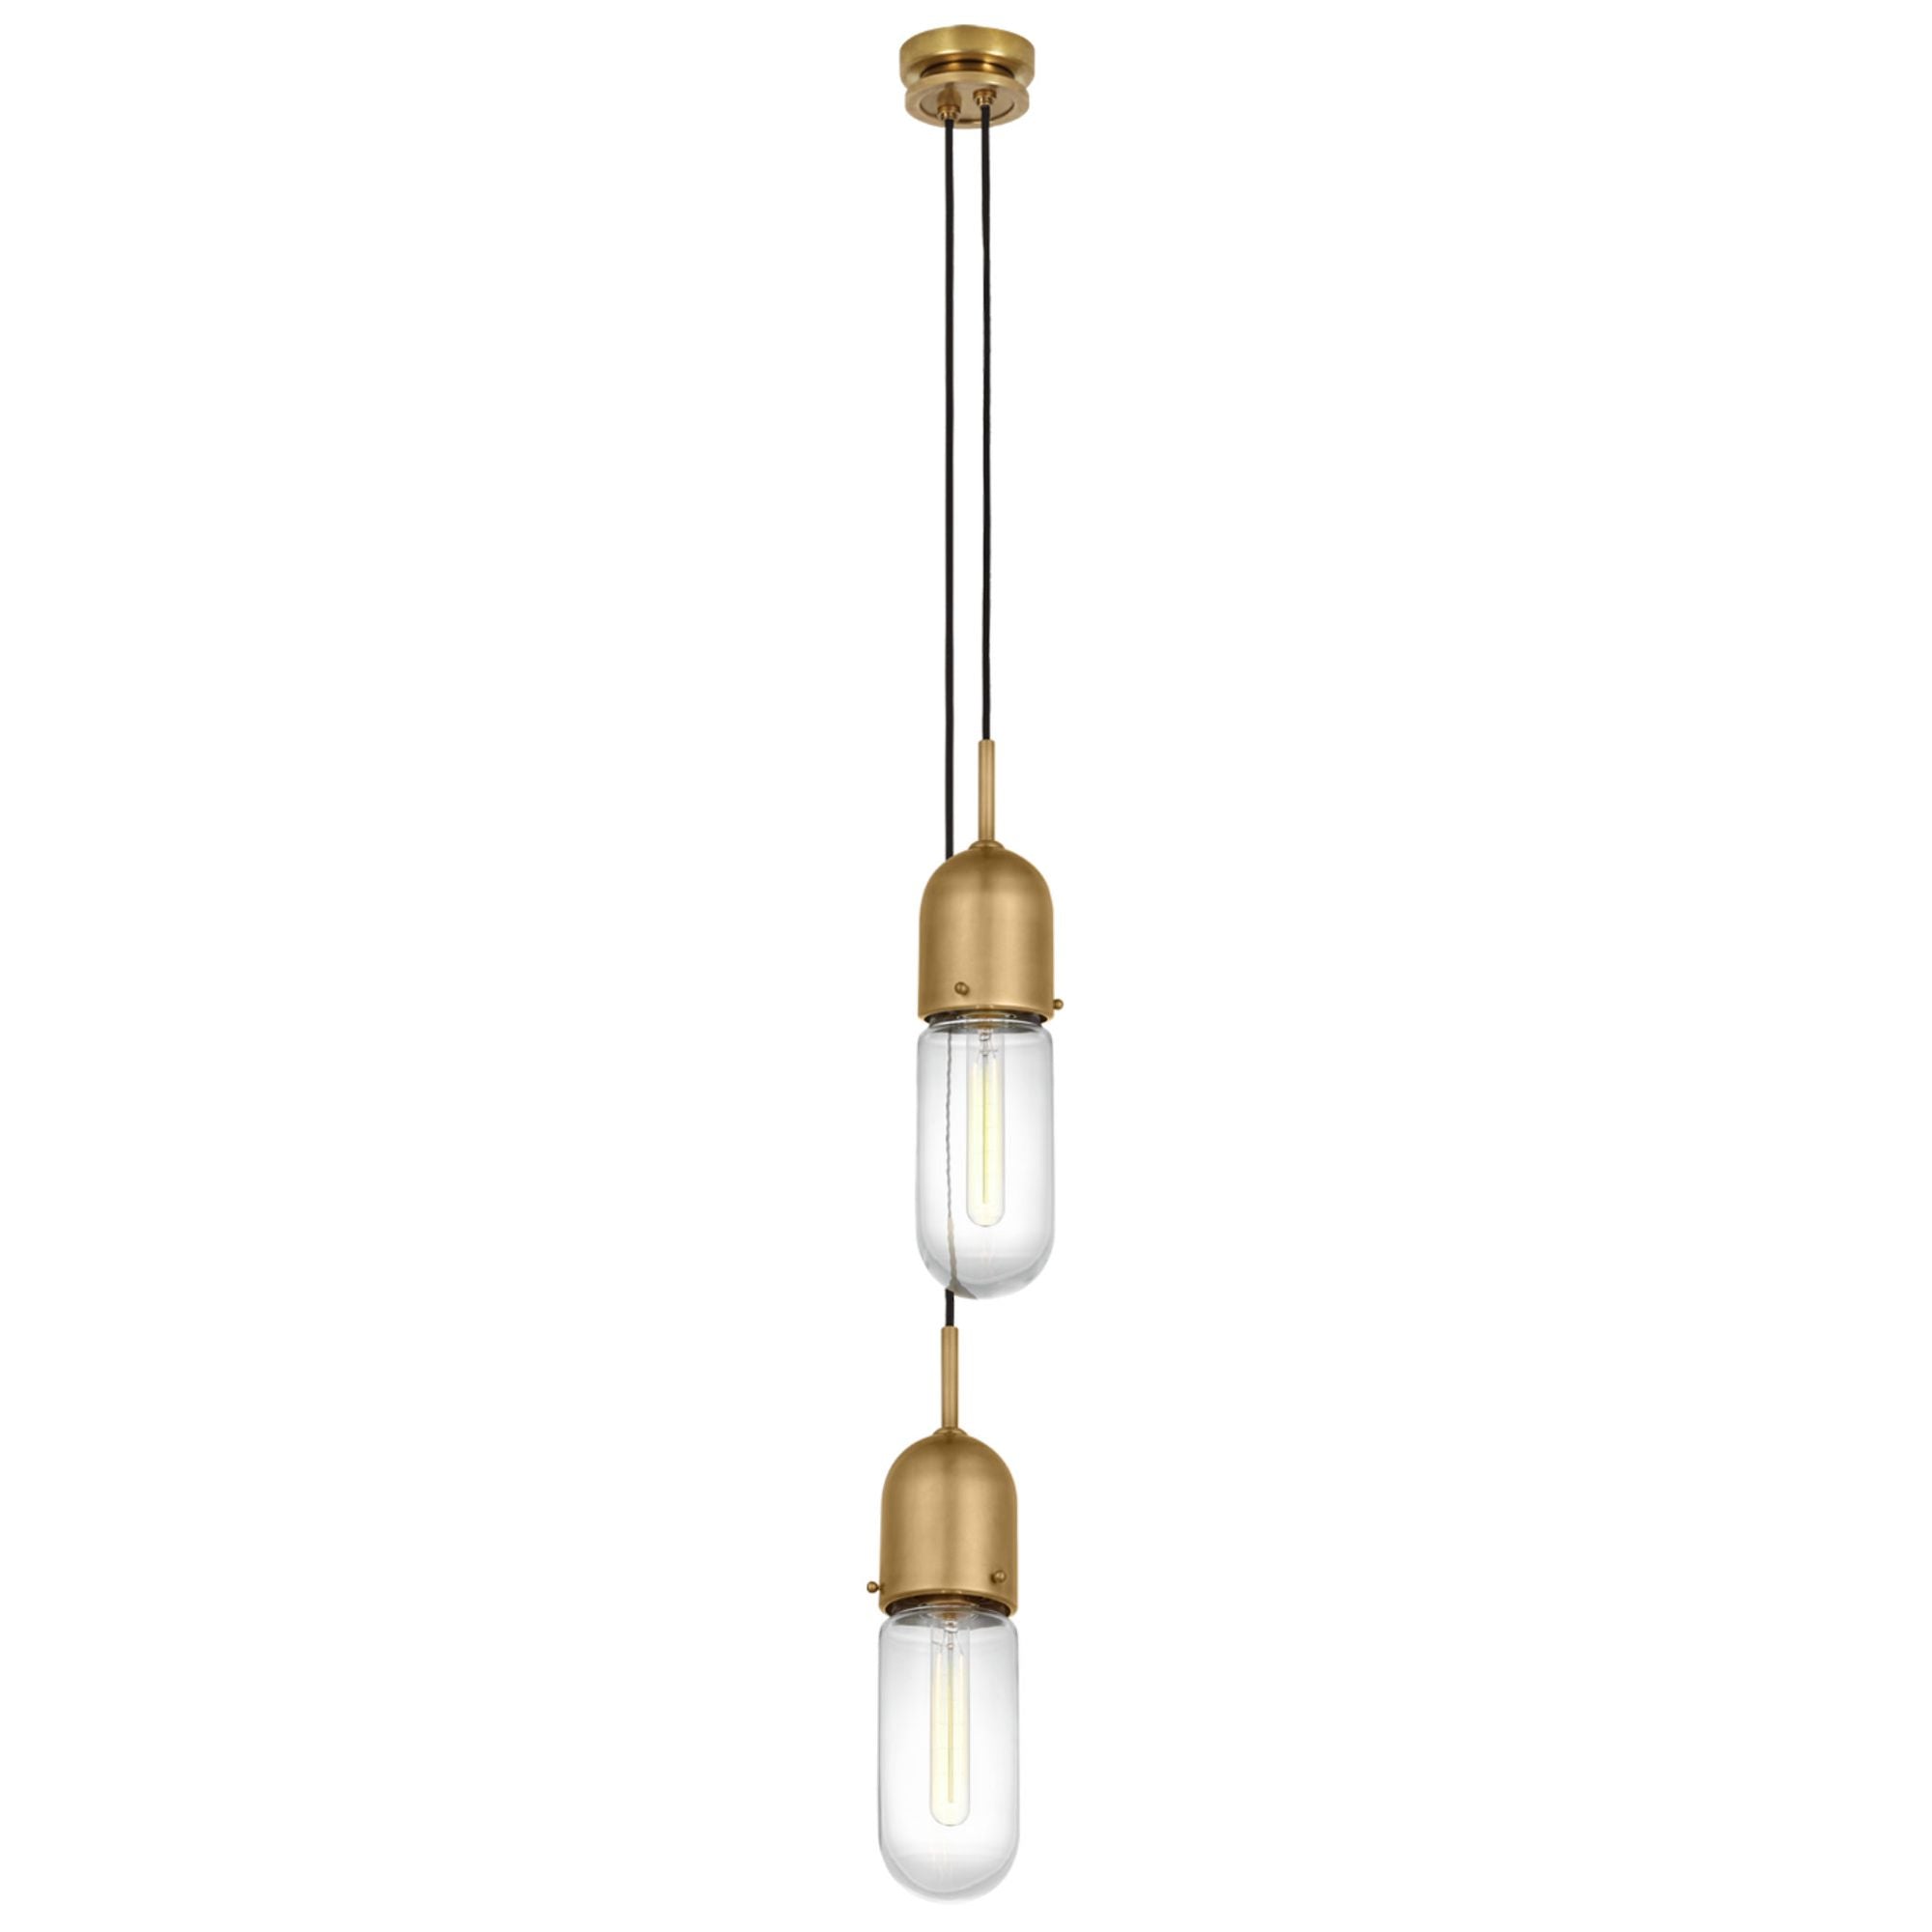 Thomas O'Brien Junio 2-Light Pendant in Hand-Rubbed Antique Brass with Clear Glass